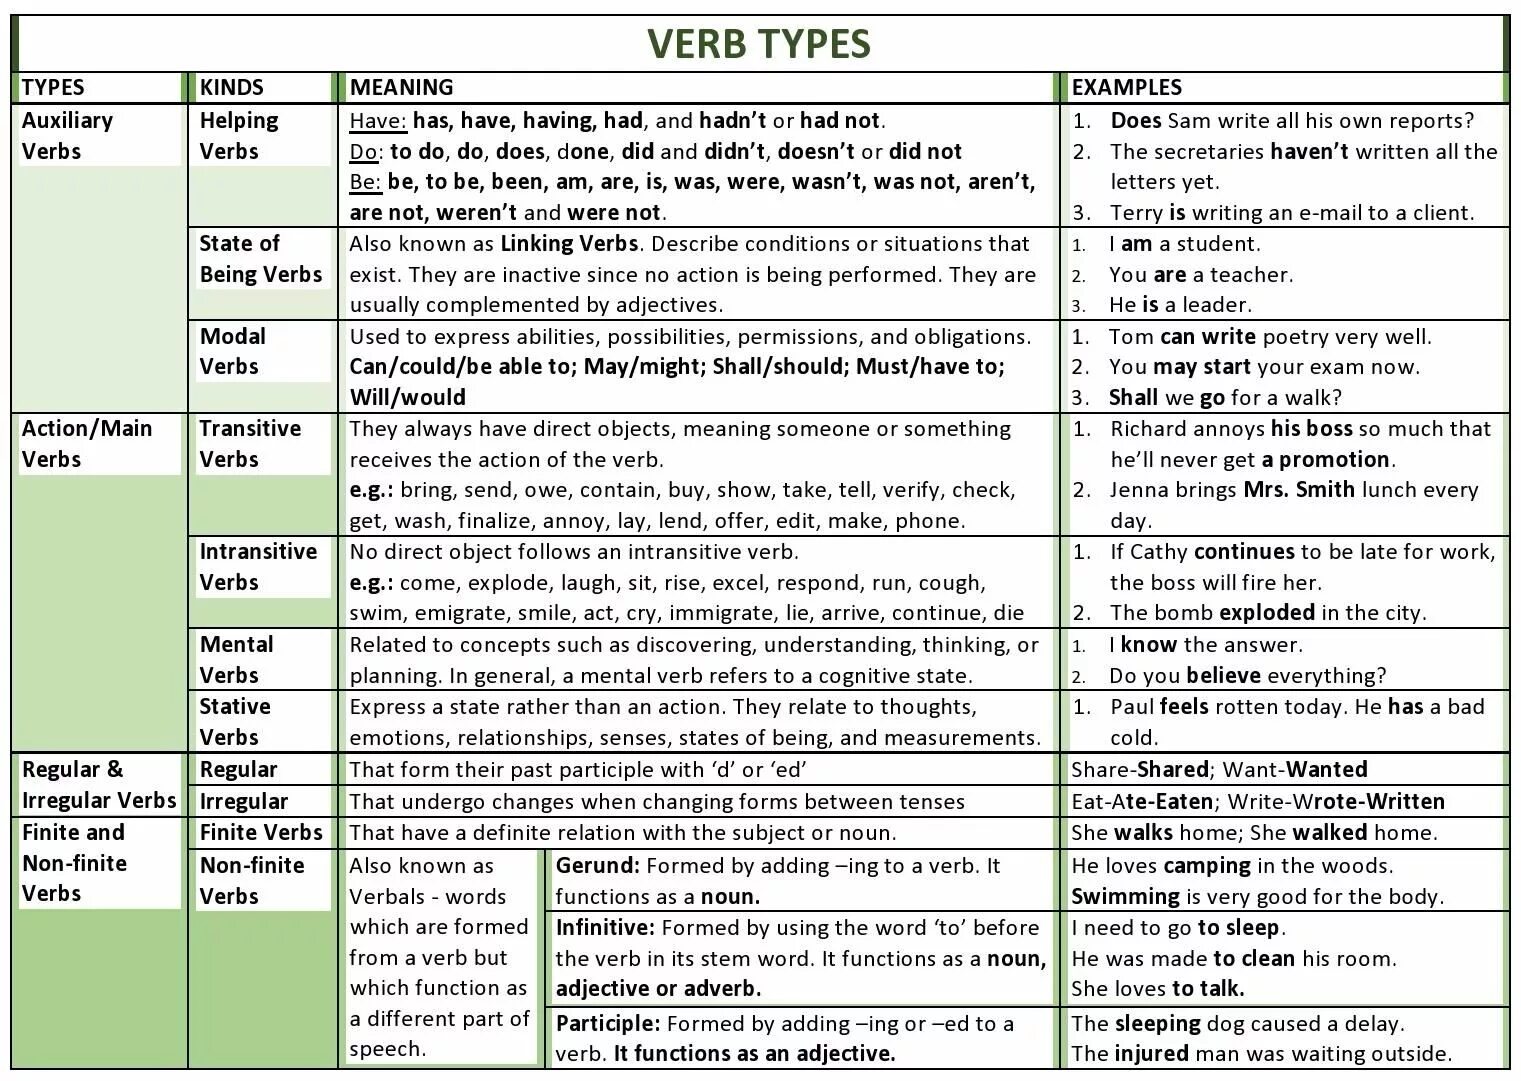 Verbs function. Types of verbs. Types of verbs in English. Auxiliary verbs в английском. Kinds of verbs.